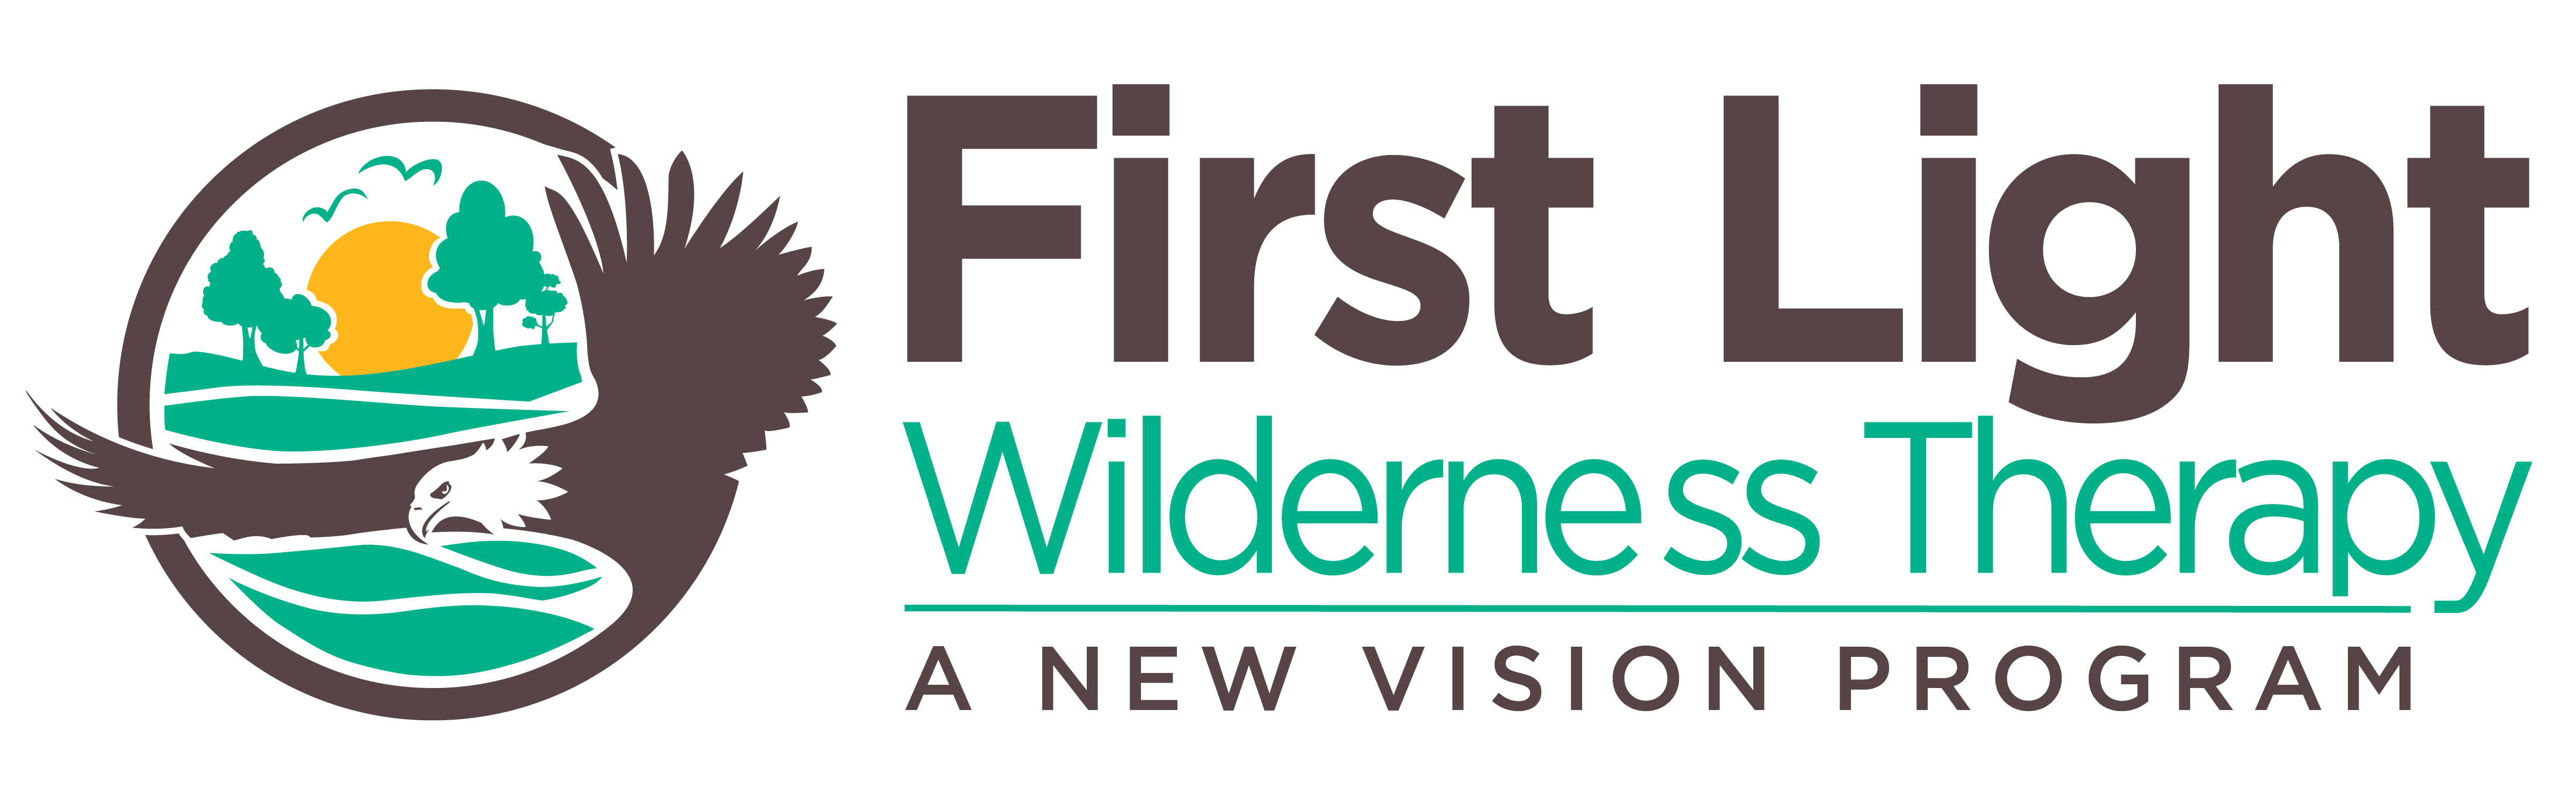 First light wilderness therapy logo